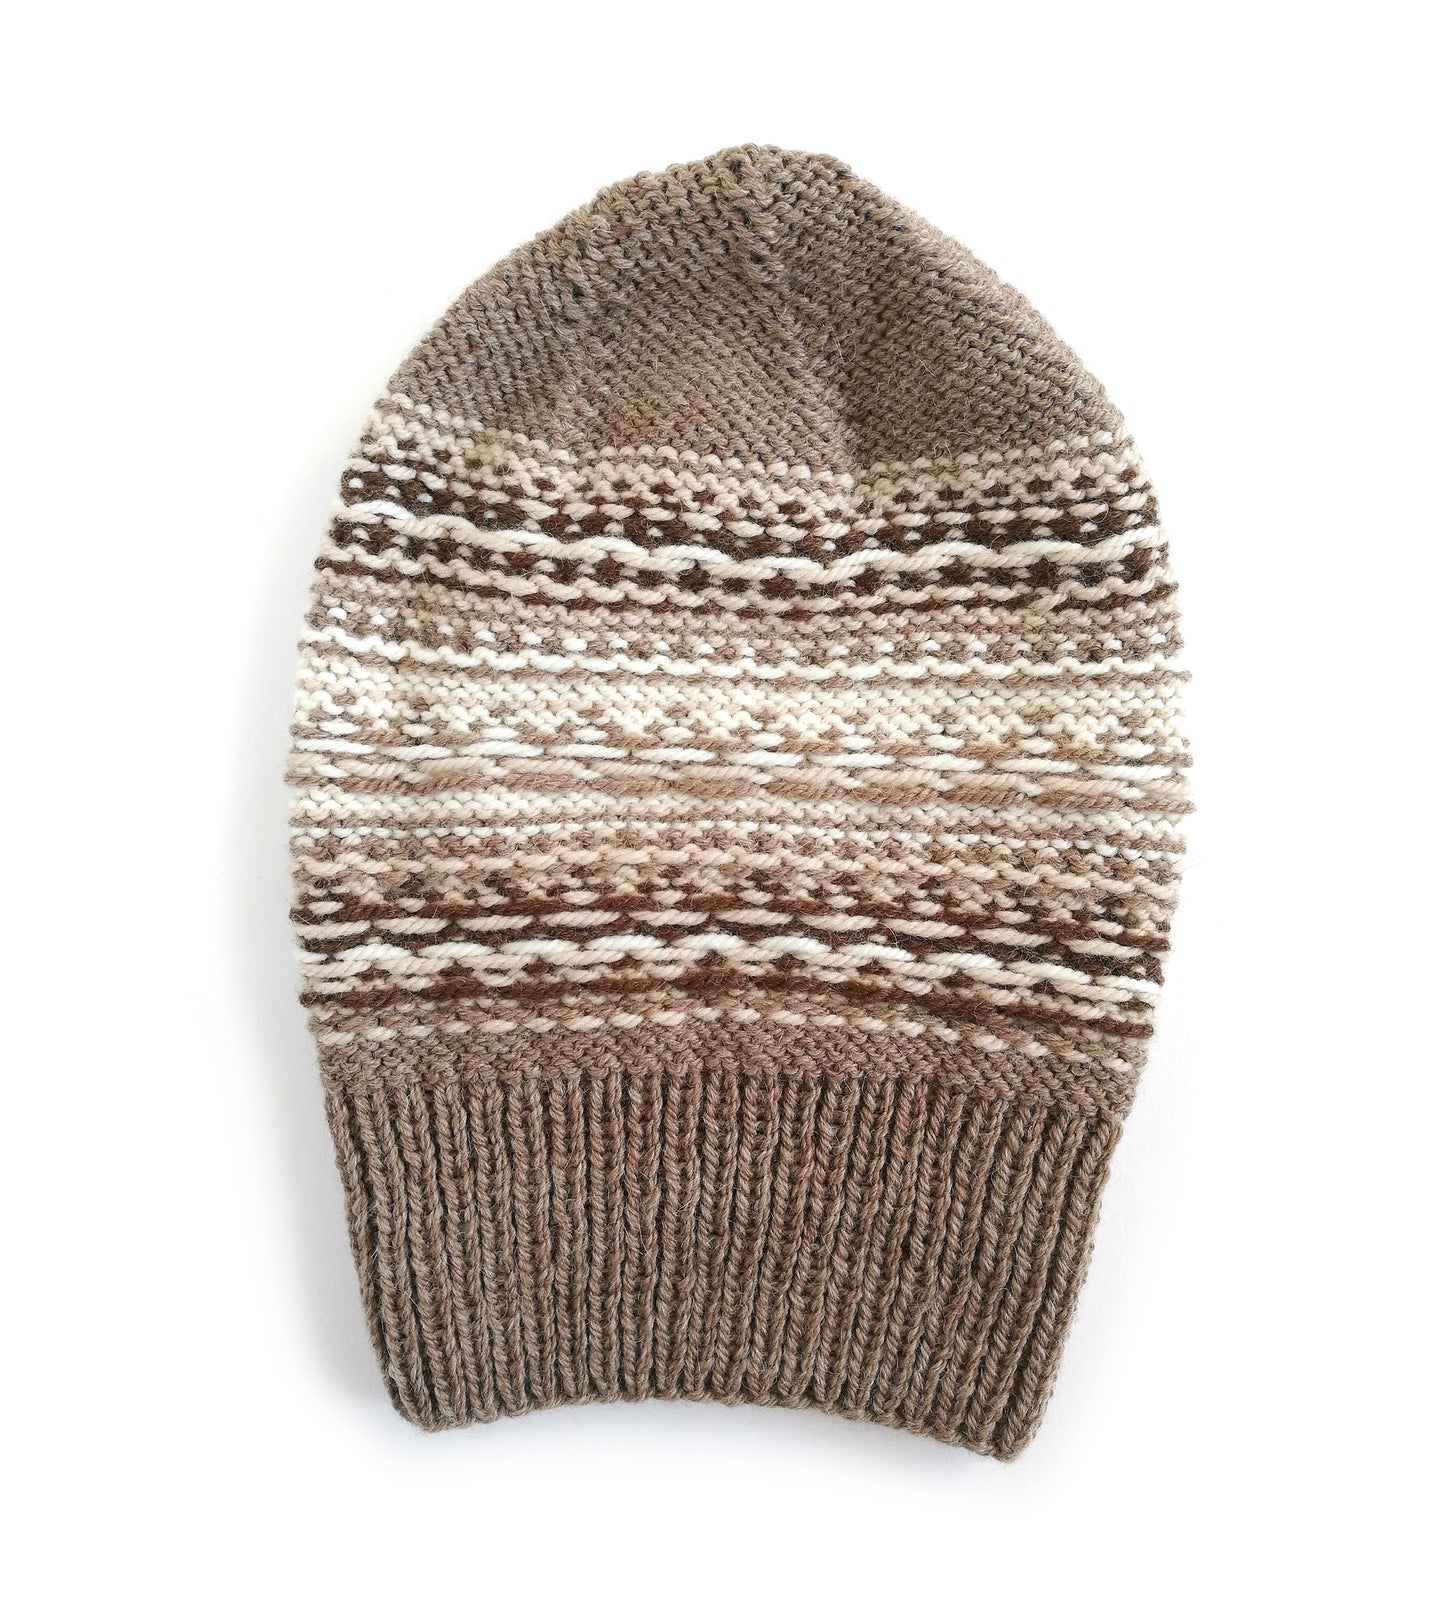 beige, brown and white wool hand-knitted Fair Isle beanie hat, wrong side